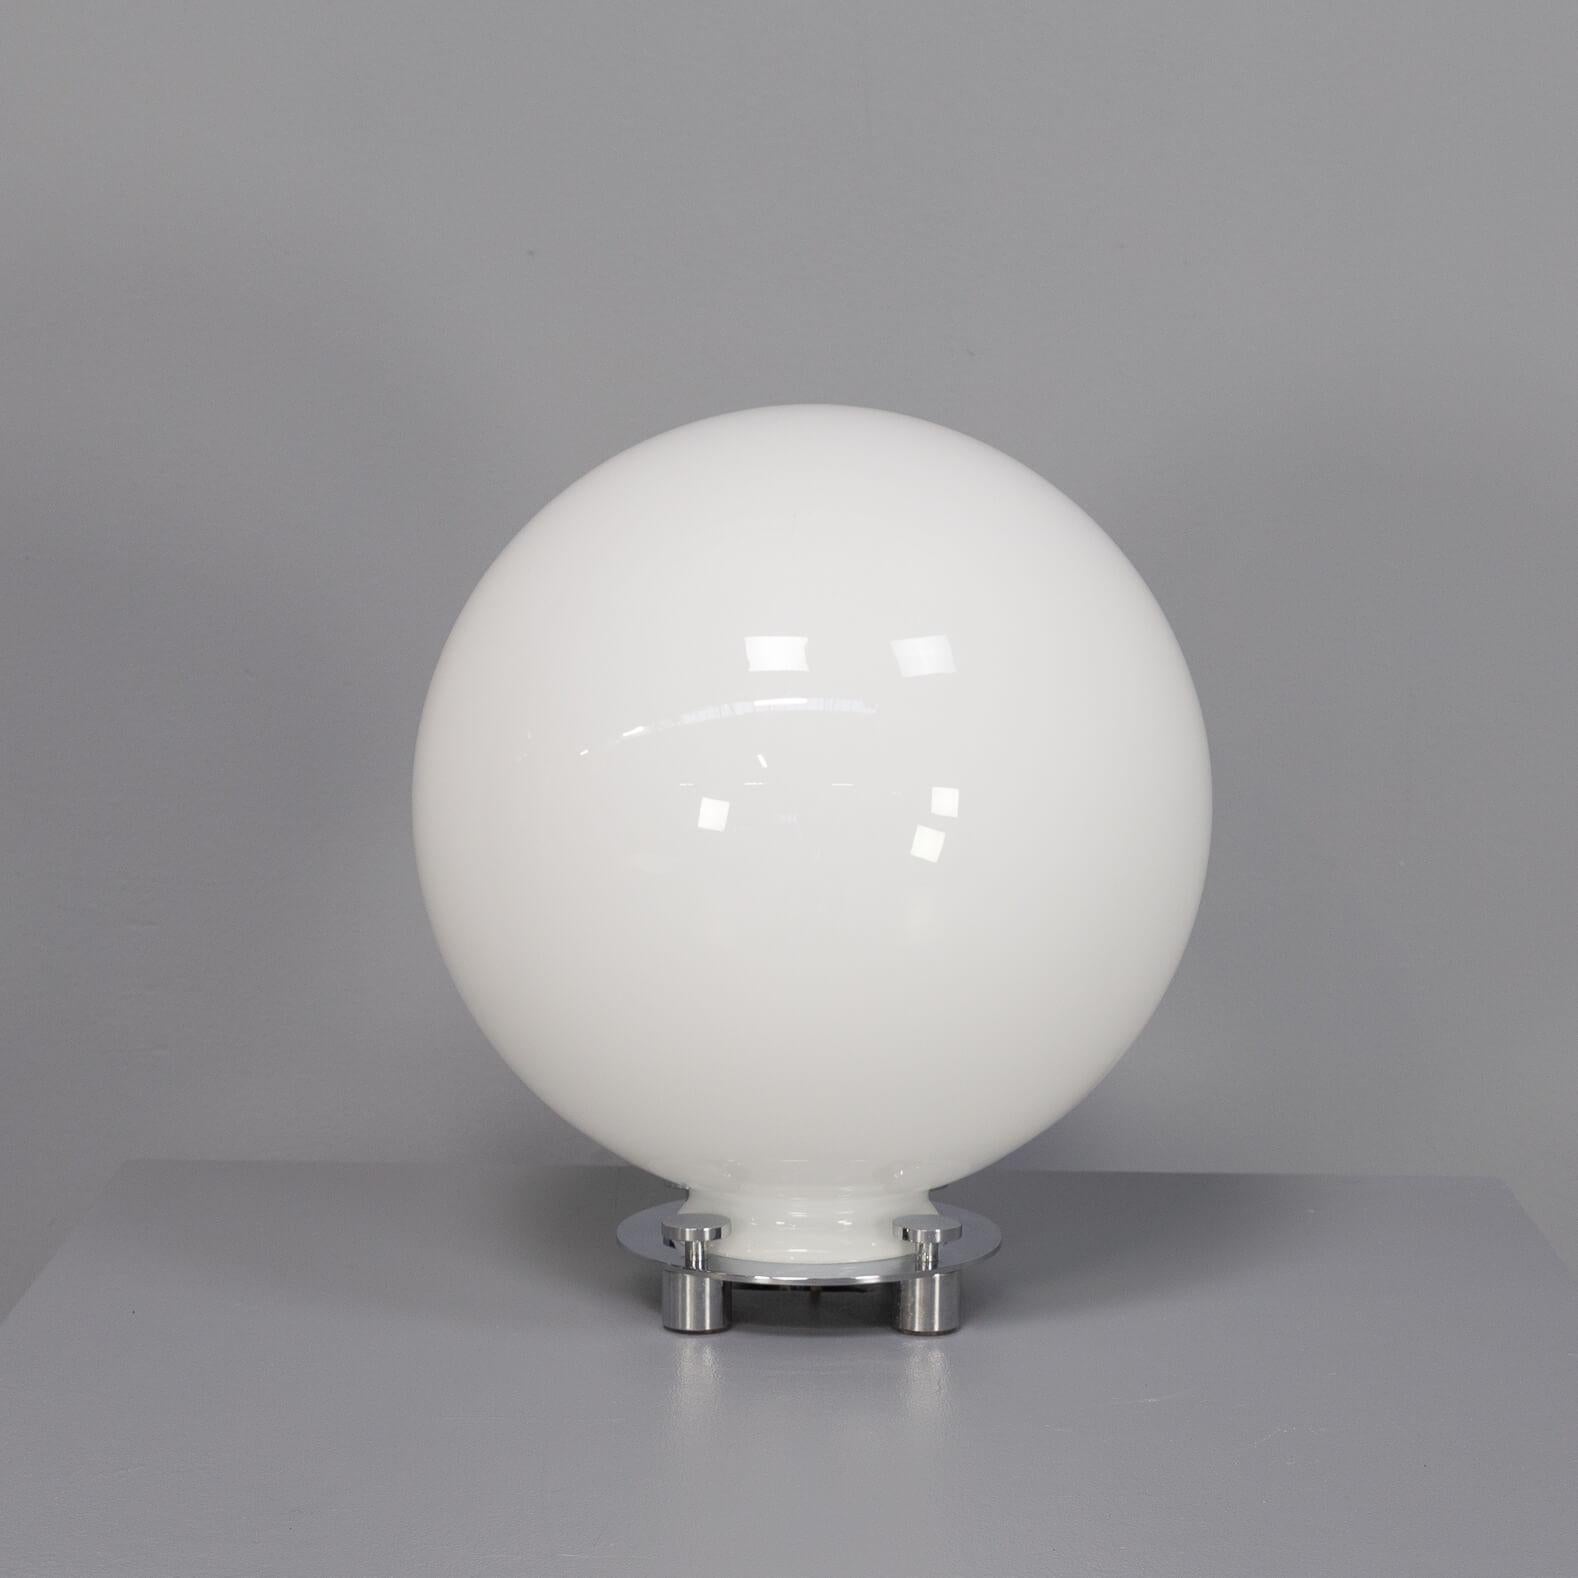 Very rare table lamp designed in the 90s by Emiliana Martinelli. Part of the big ball 35 pendant family this table lamp is very rare. Round opaline glass, chromed foot.Good condition with E27 socket that allow you also to place led bulbs. Timeless